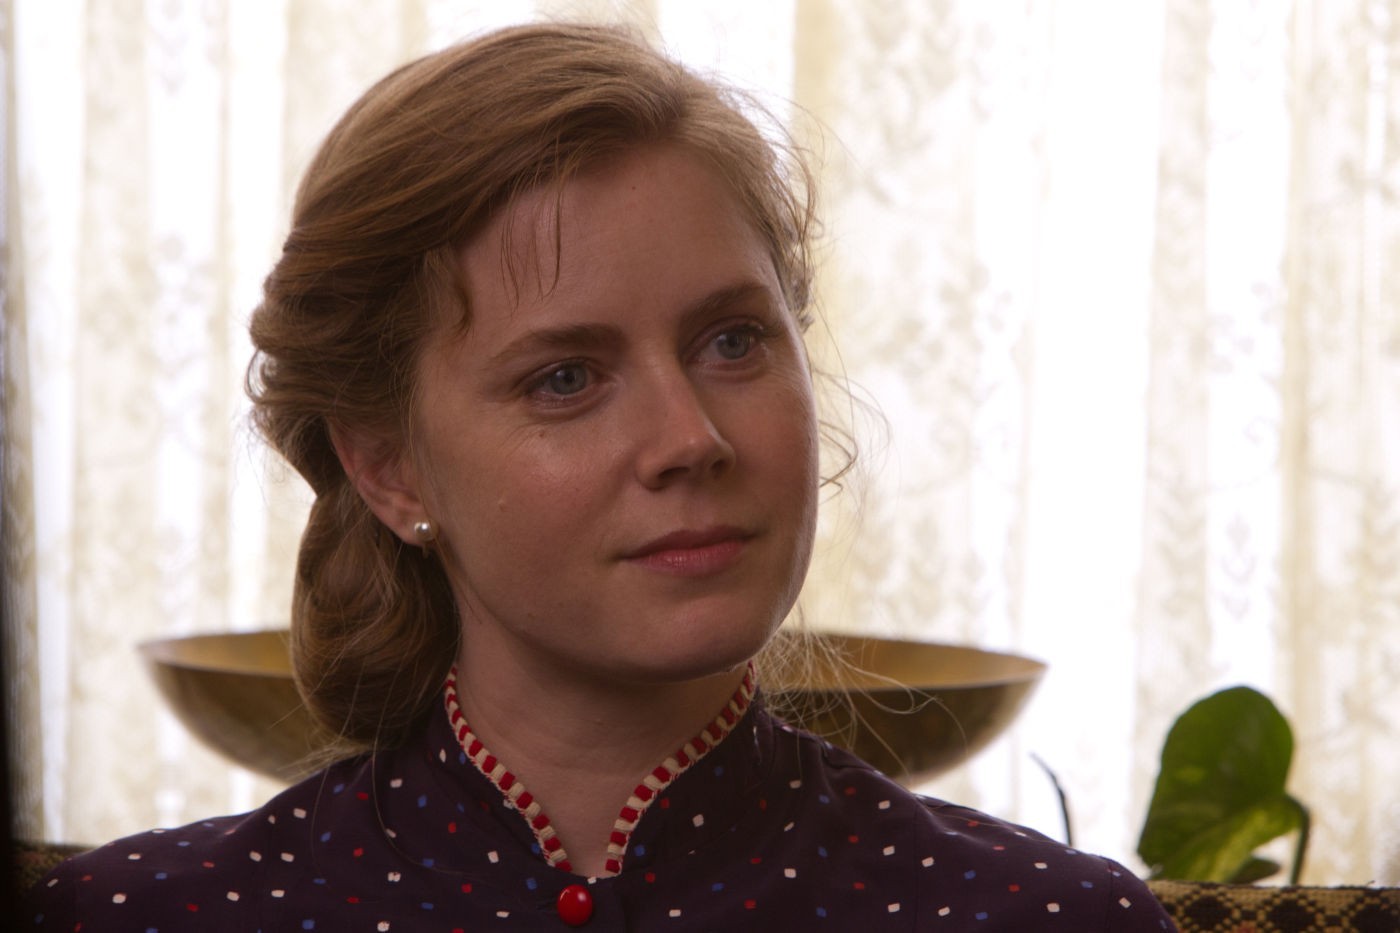 Amy Adams stars as Mary Sue Dodd in The Weinstein Company's The Master (2012)